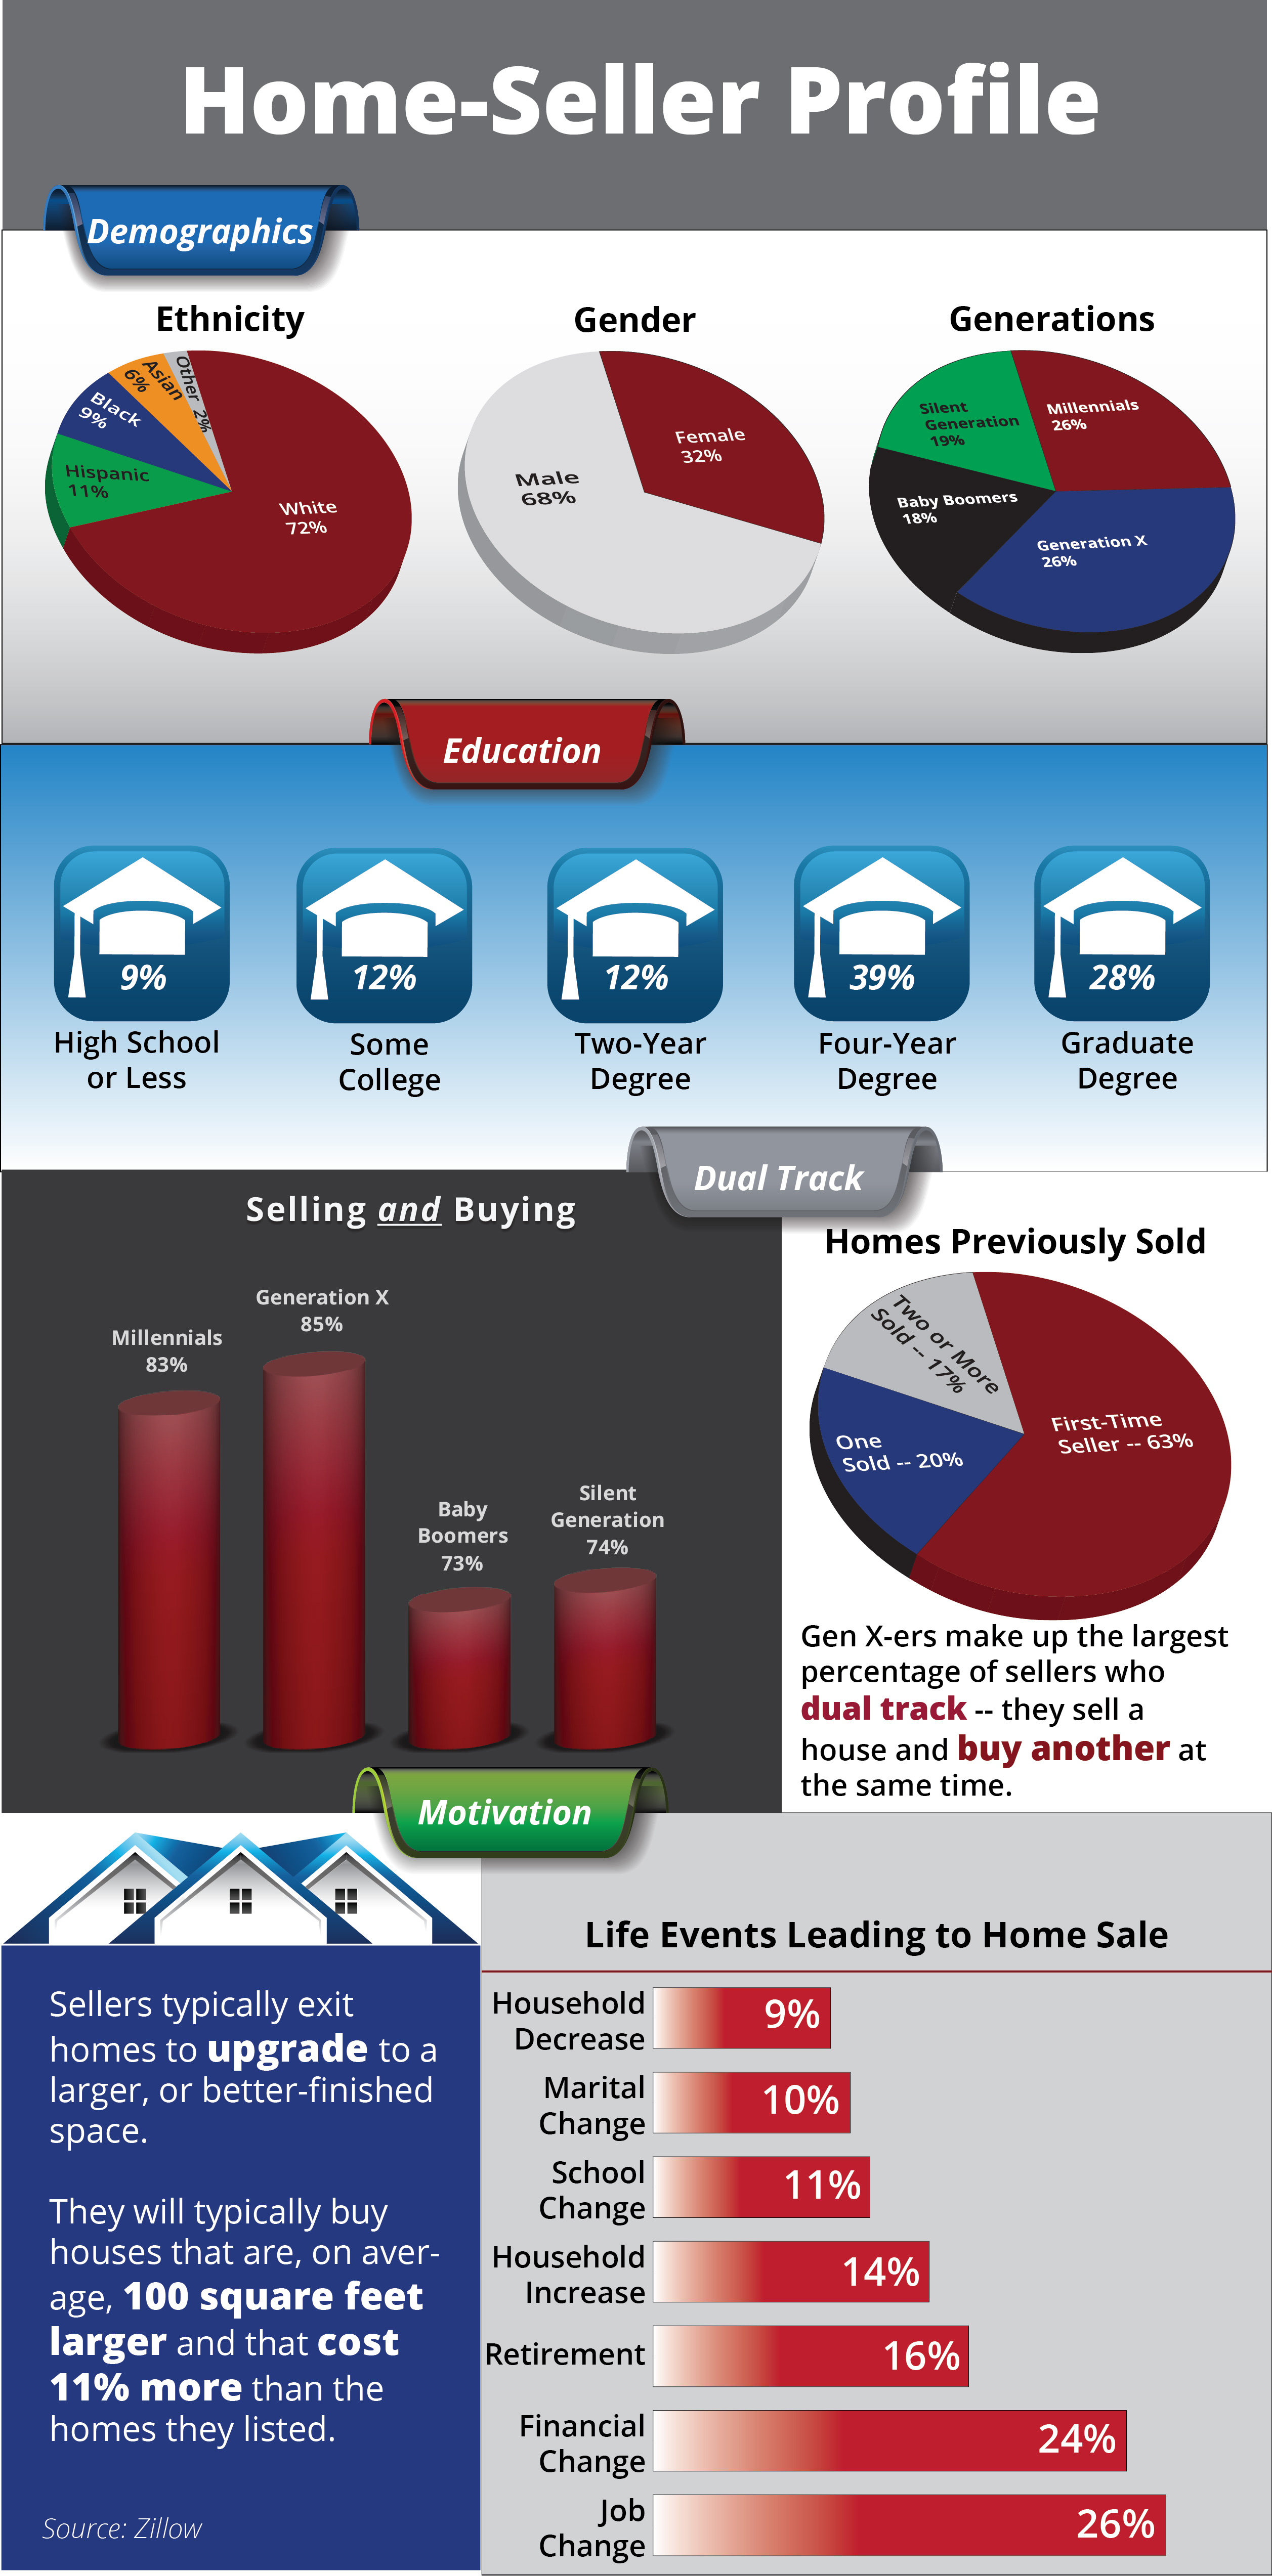 Home-Seller Profile Infographic